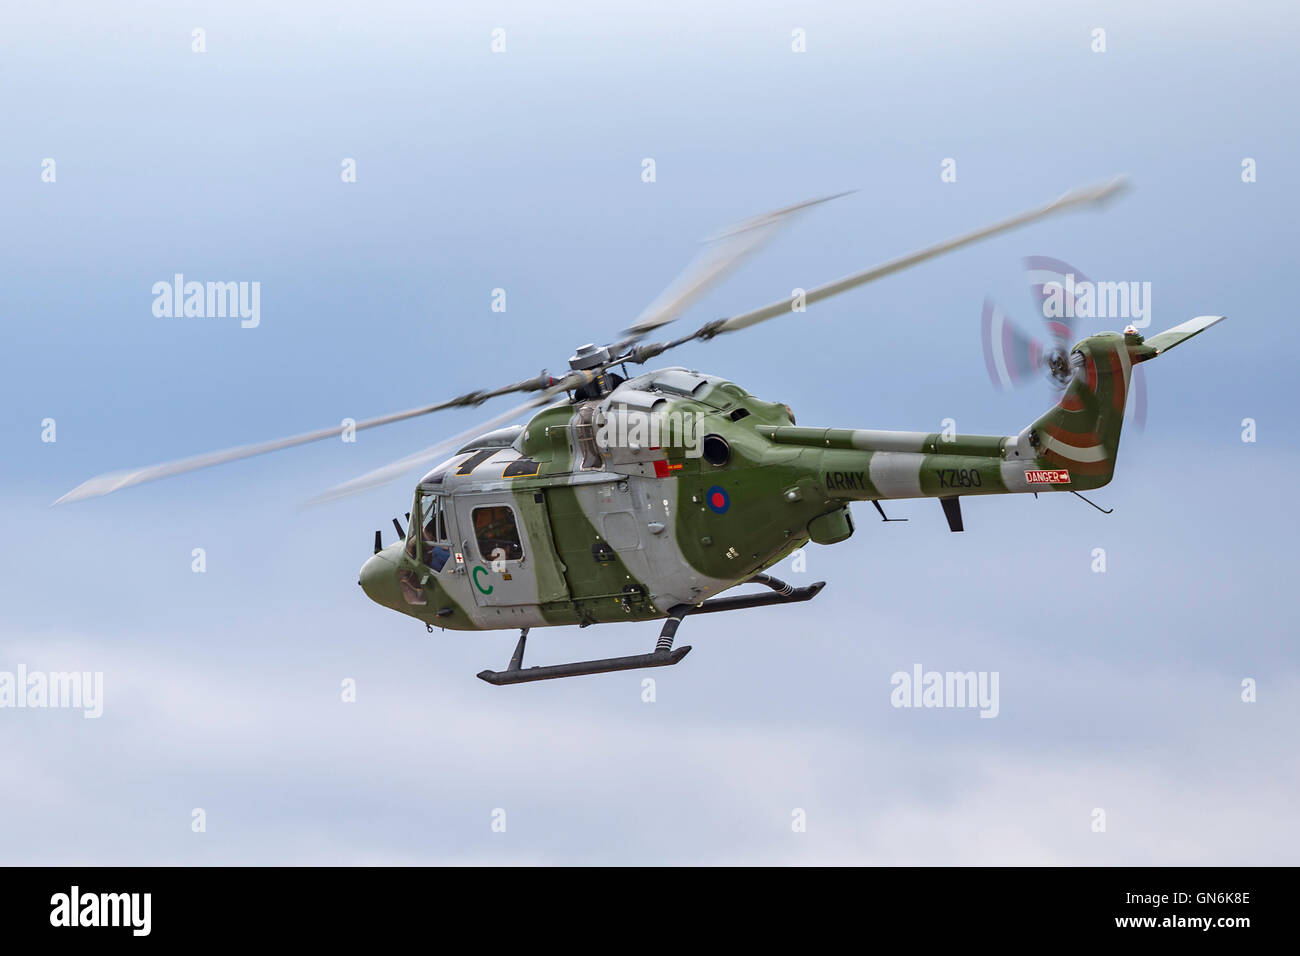 British Army (Royal Army) Air Corps (AAC) Westland Lynx AH7 battlefield reconnaissance helicopter. Stock Photo